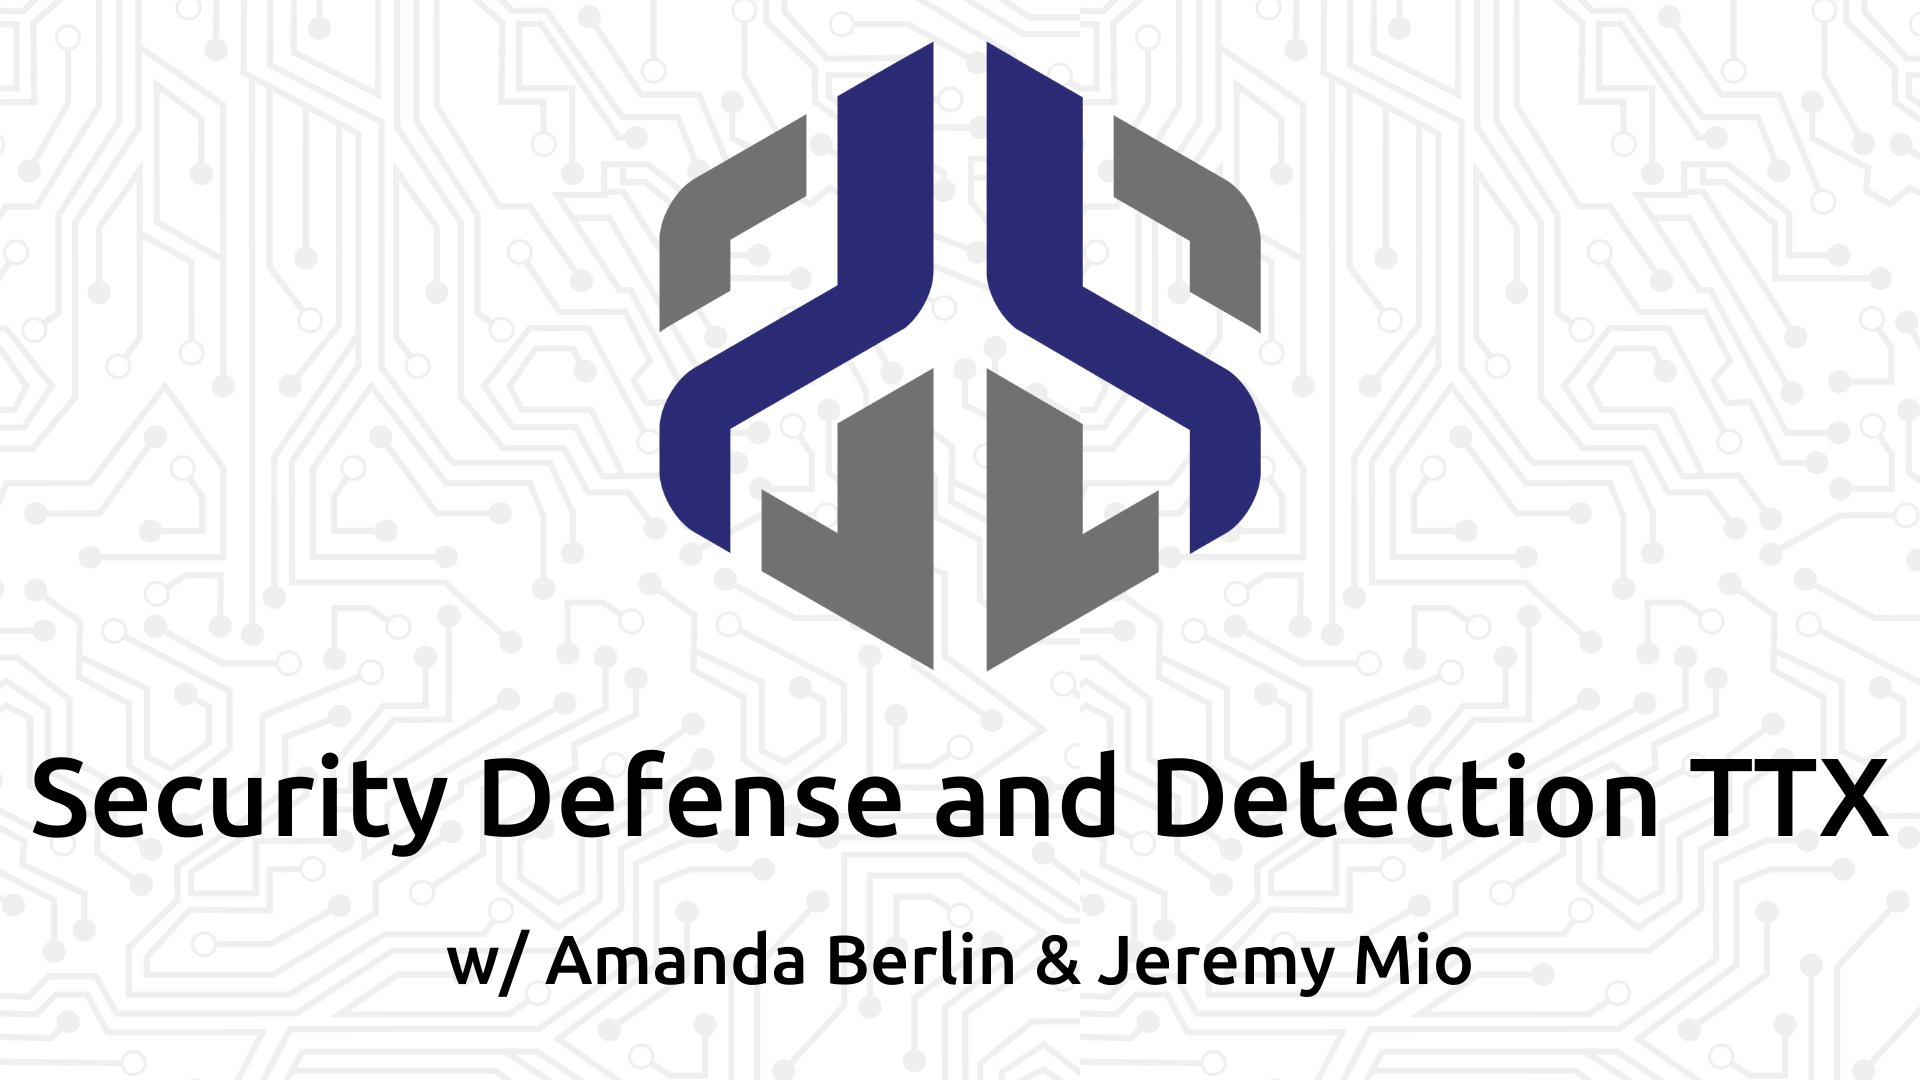 Security Defense and Detection TTX